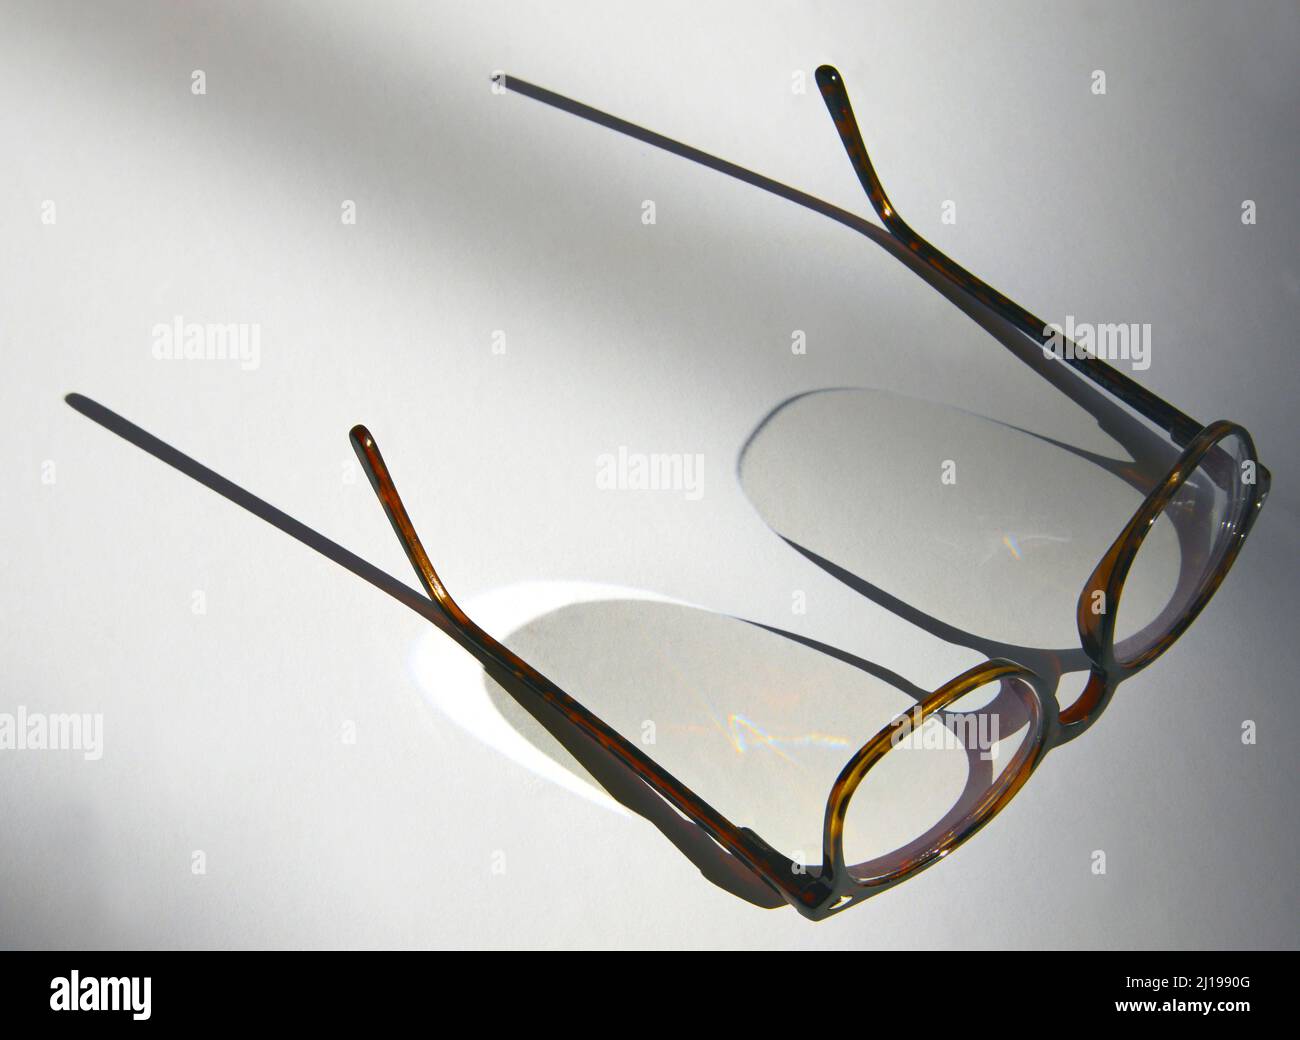 Glasses or eye glasses to correct optical problems. Stock Photo